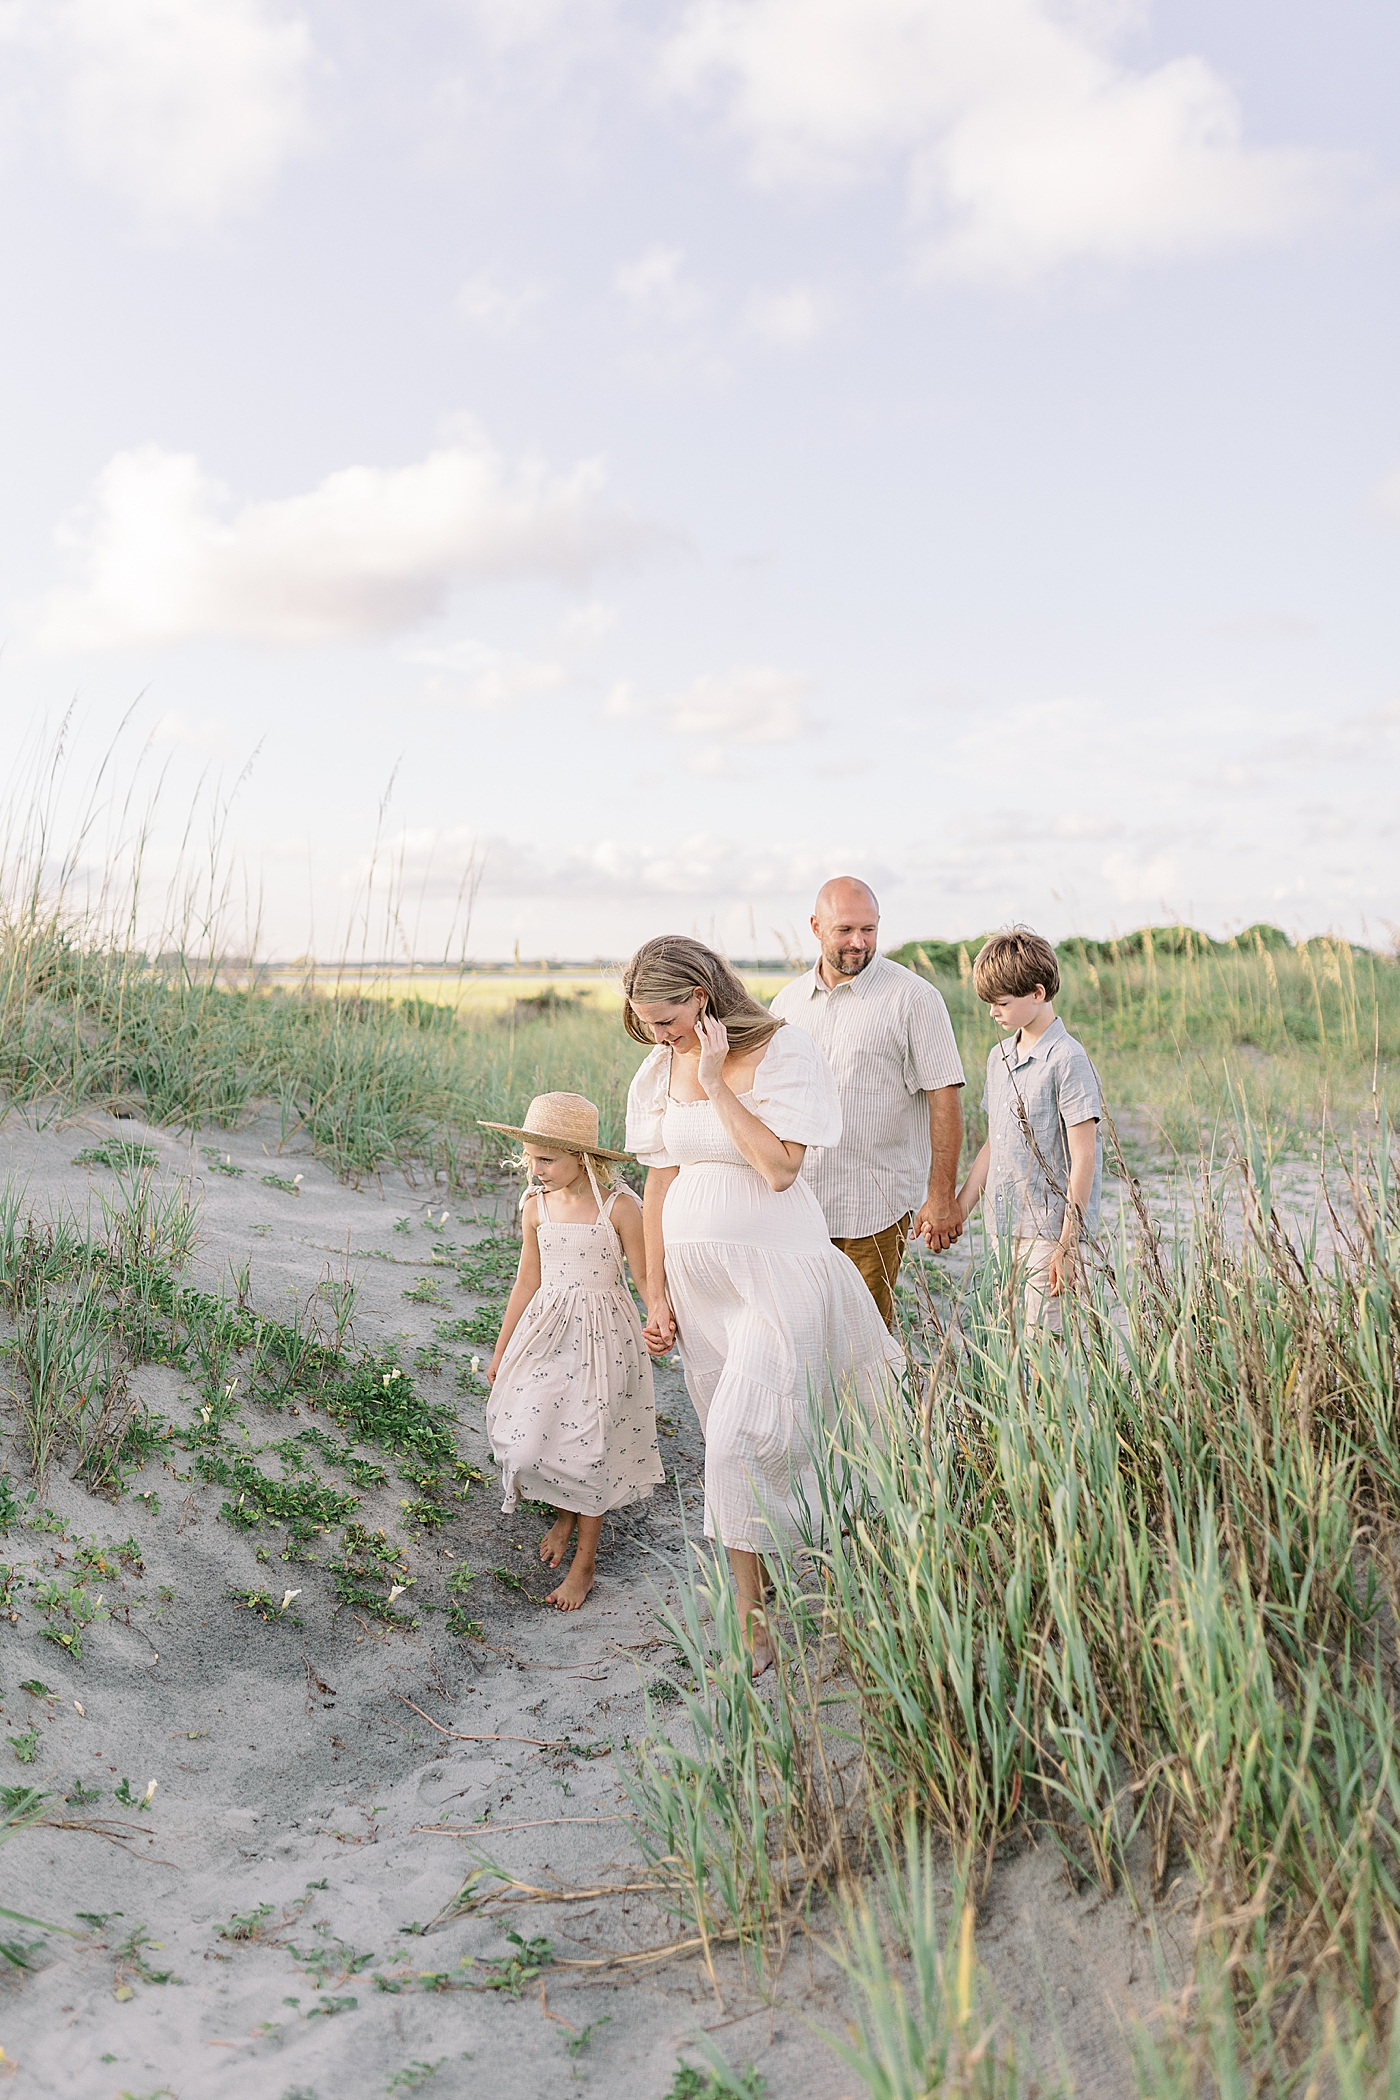 Family of four walking to the beach while holding hands | Image by Caitlyn Motycka